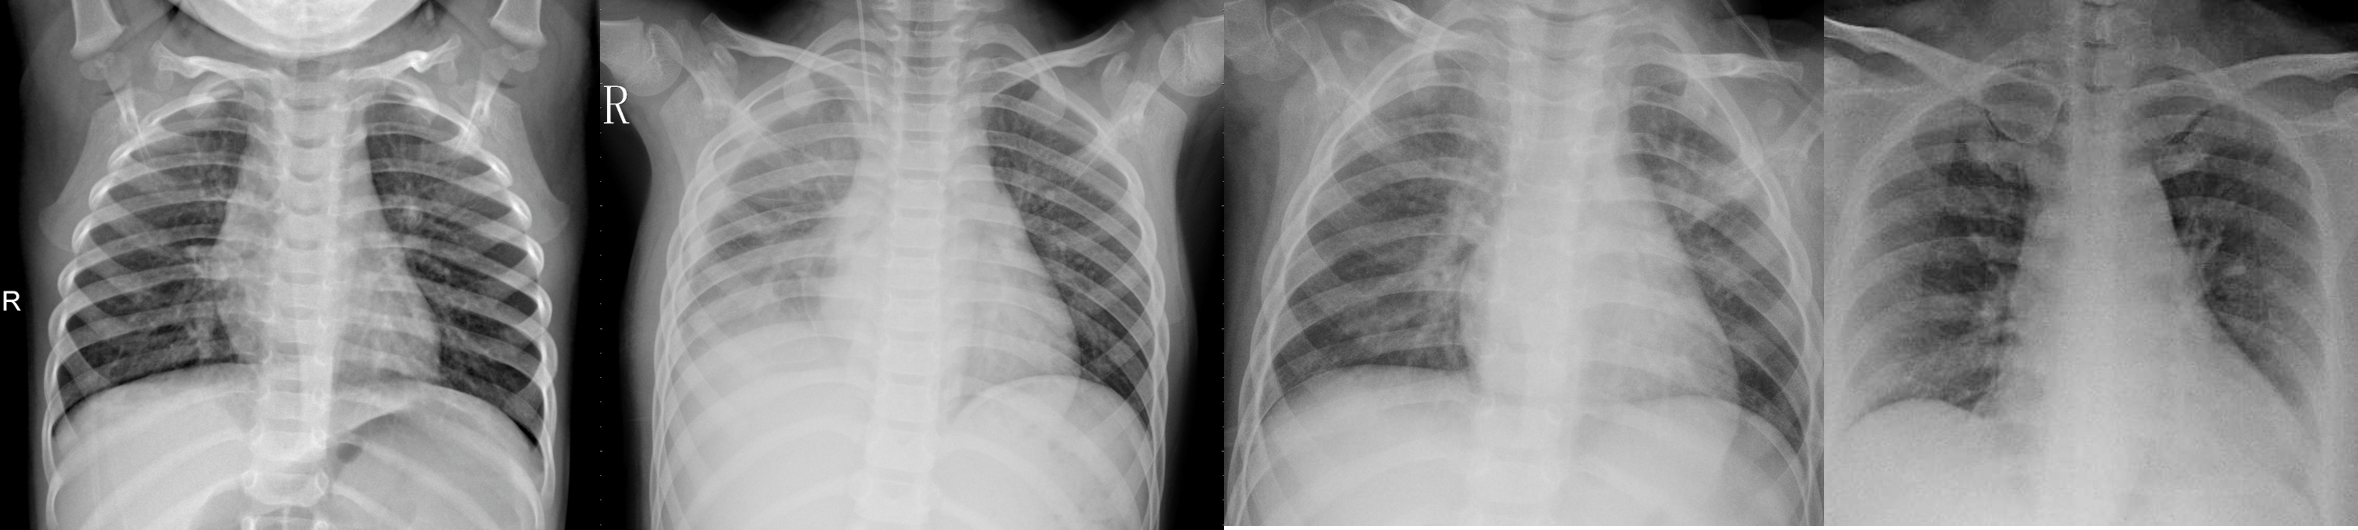 Detecting Covid 19 Induced Pneumonia From Chest X Rays With